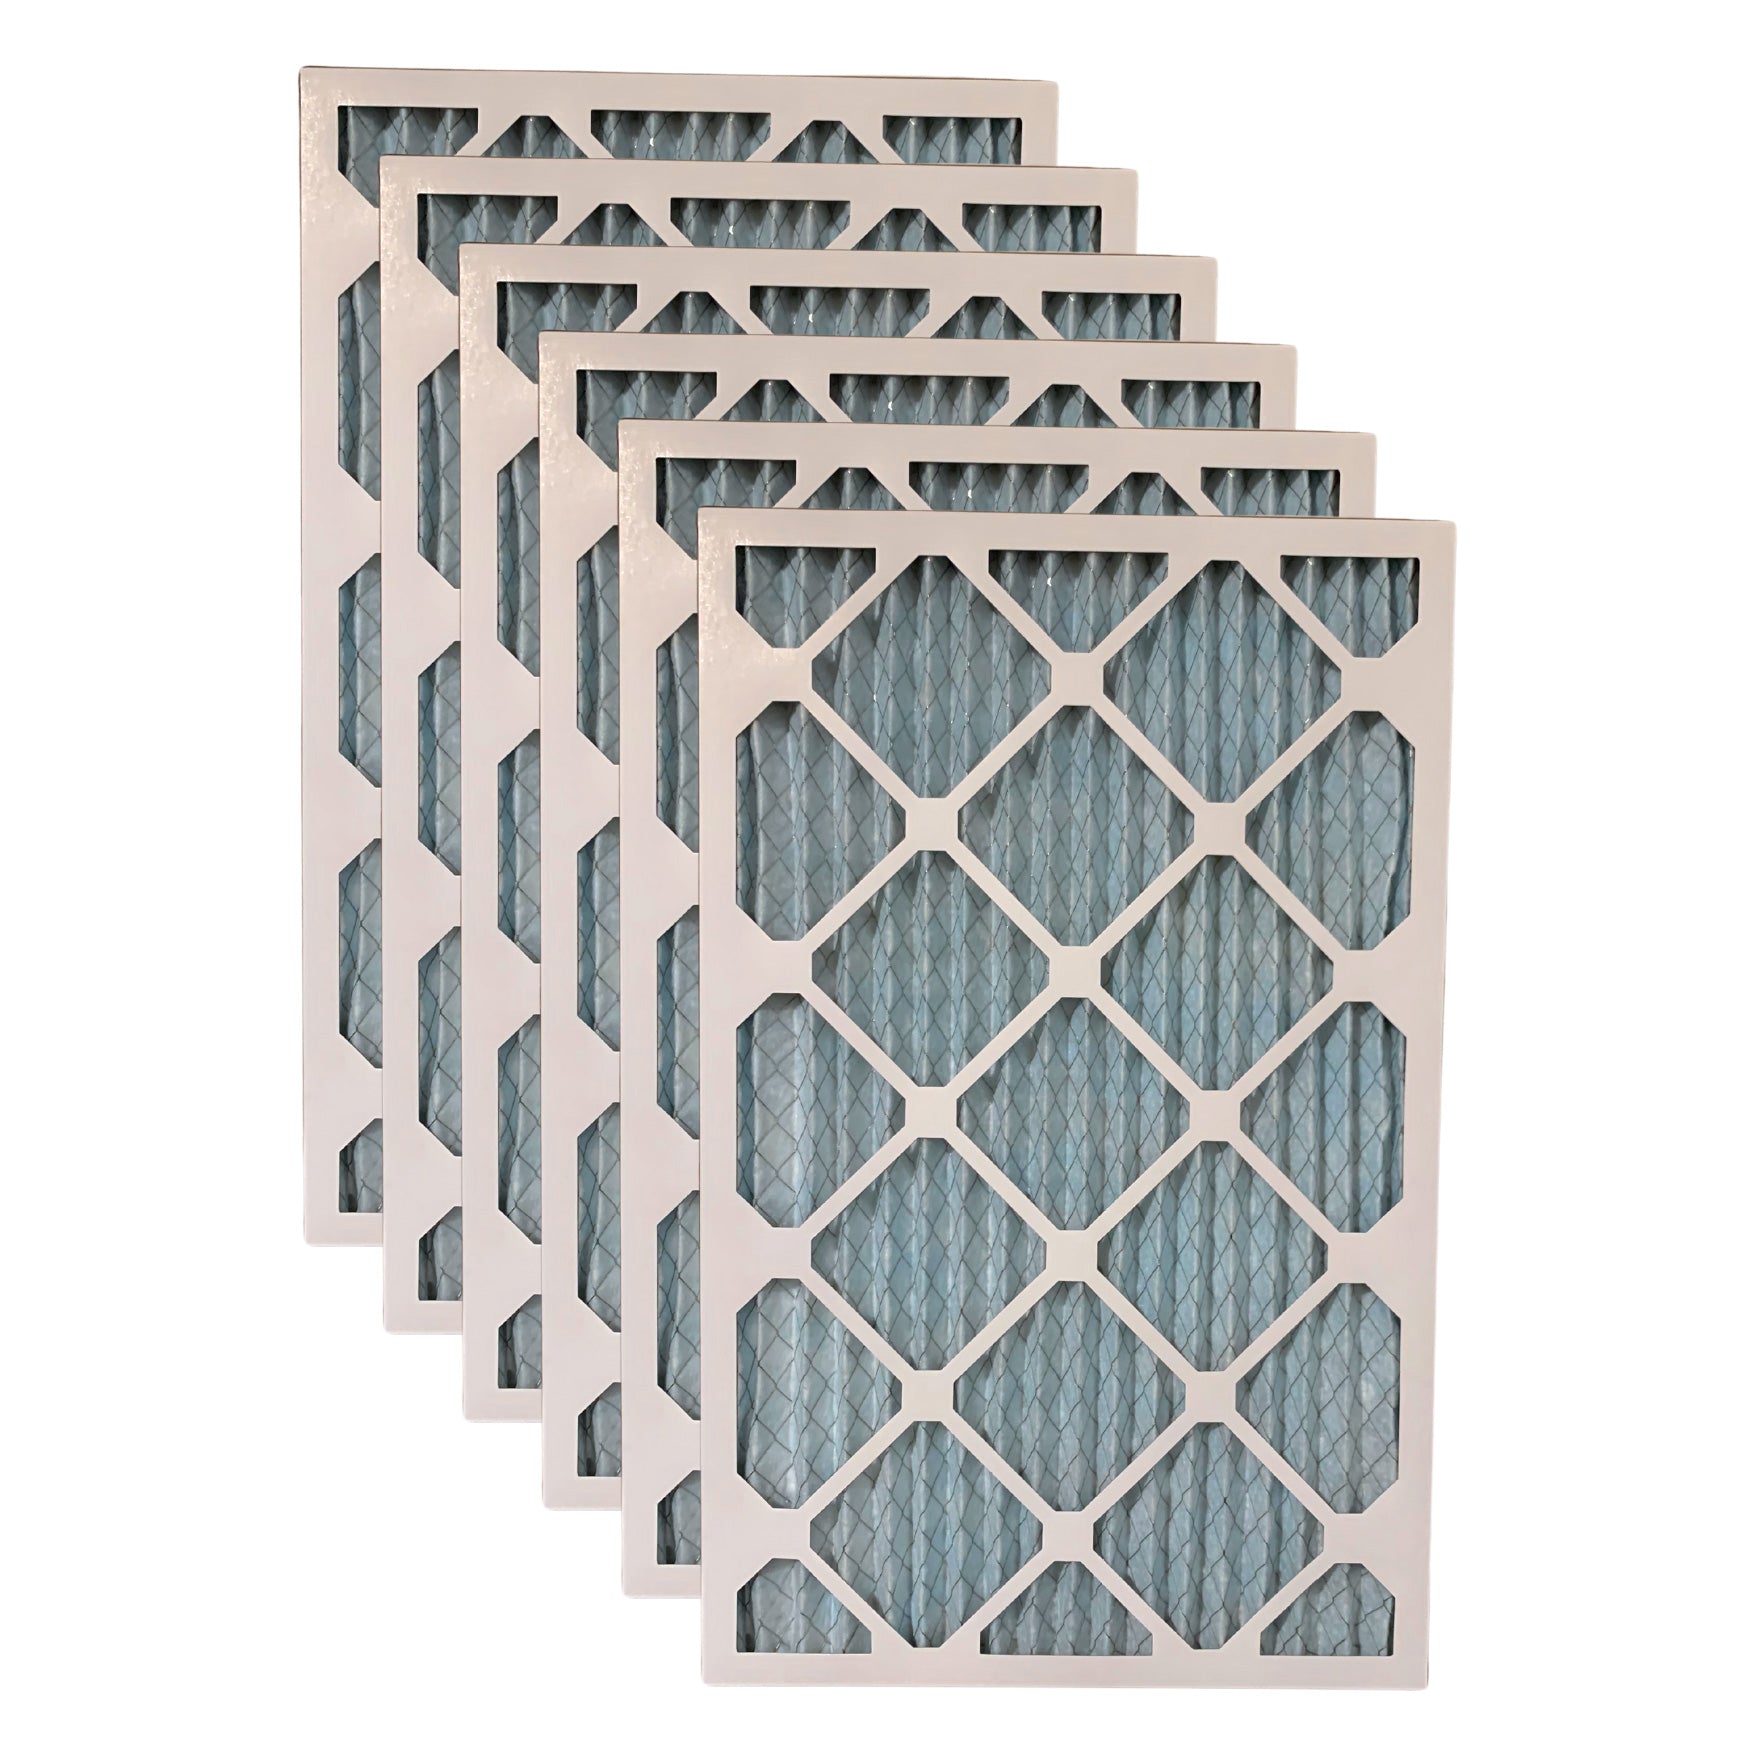 16x20x1 MERV 11 Pleated Air Filter - Case of 6